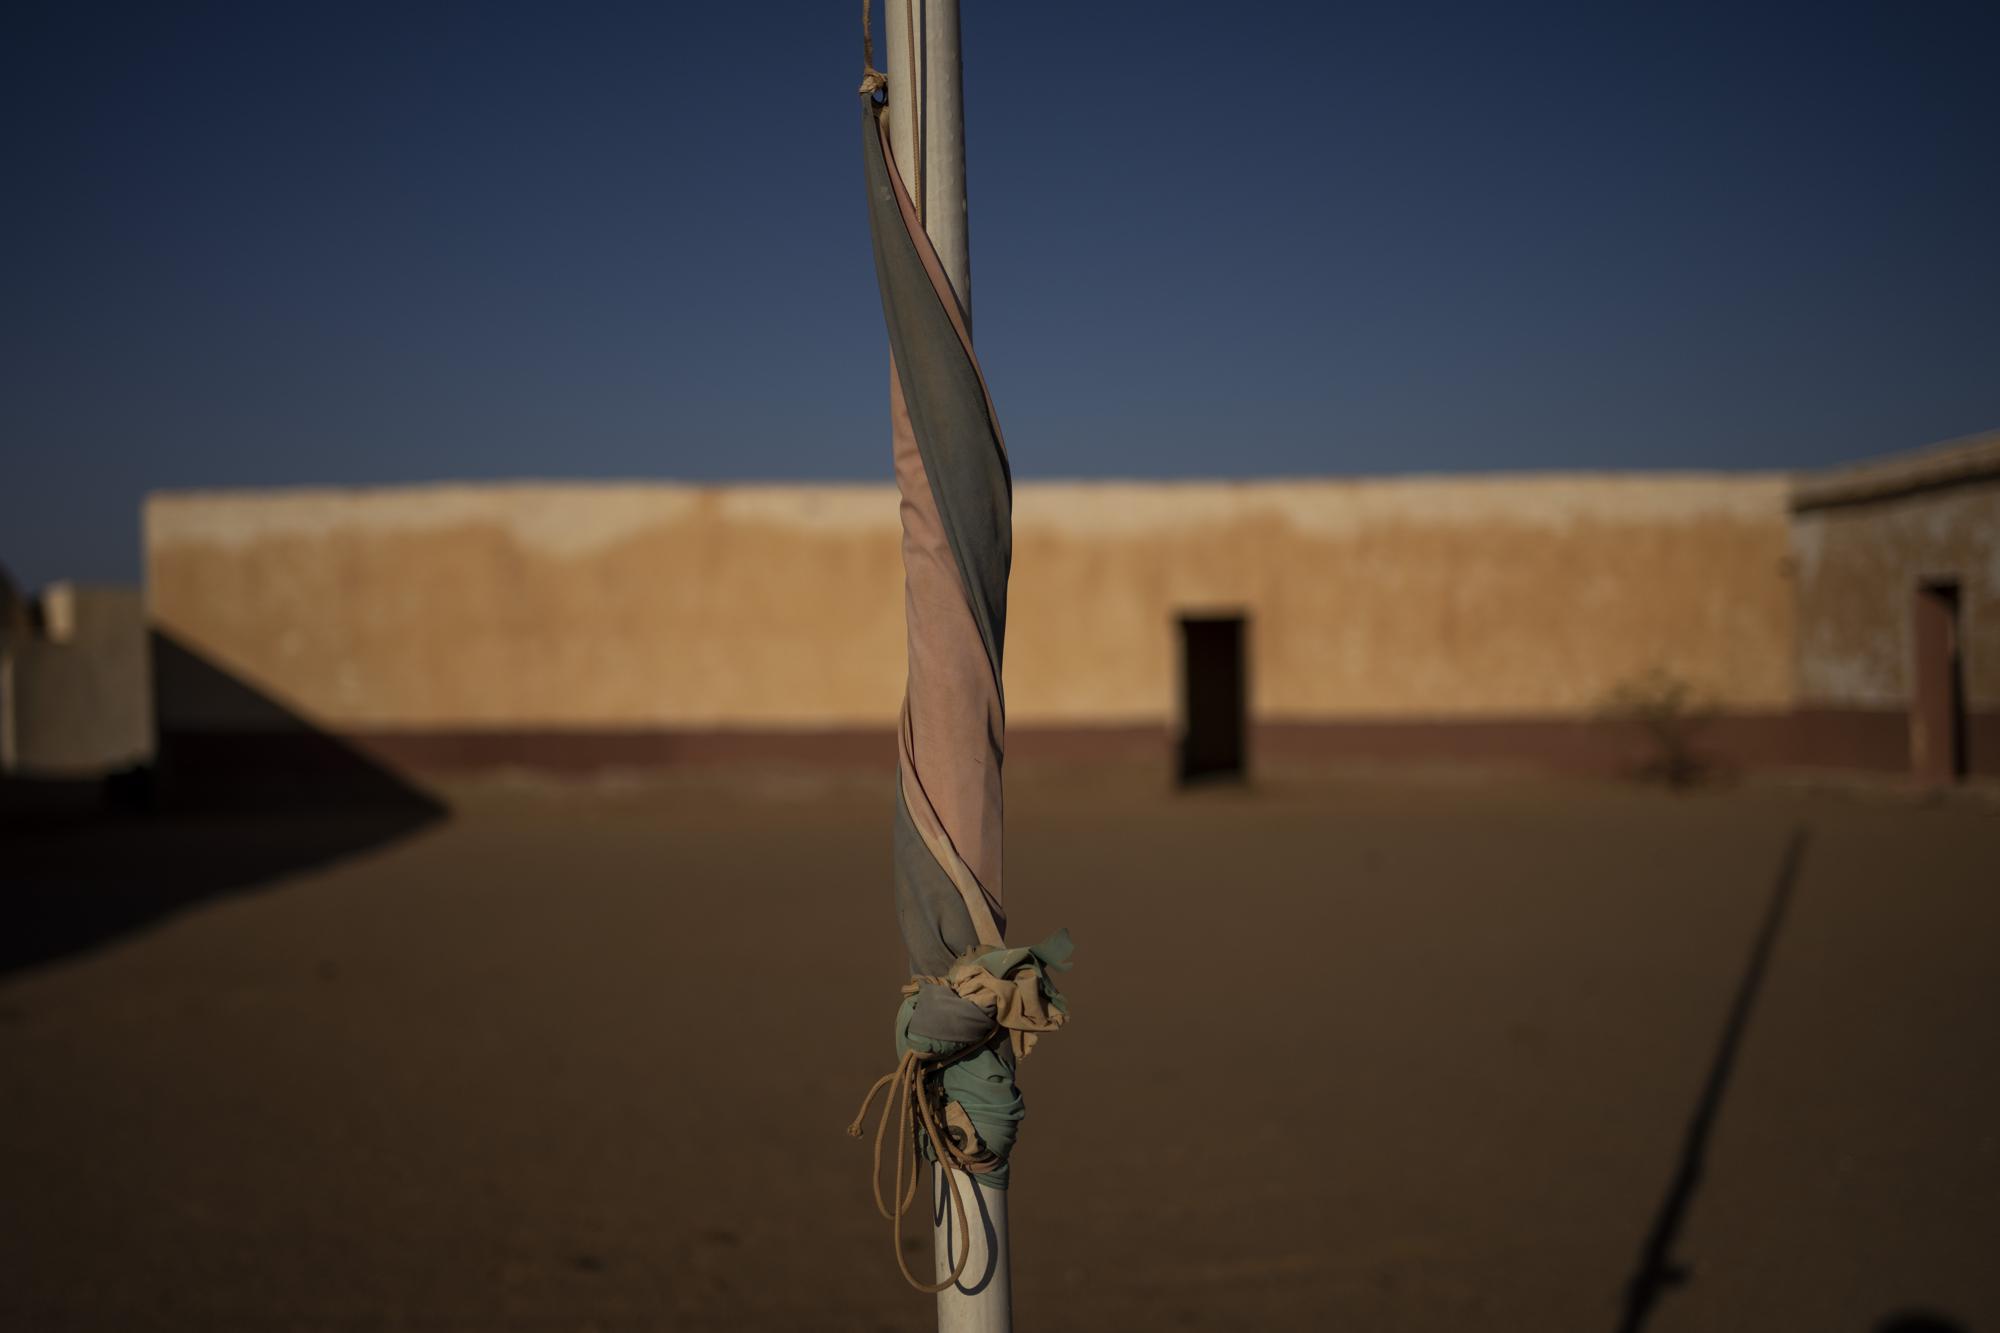 A Sahrawi flag is wrapped around a post in a closed school in Bir Lahlou, Western Sahara, Wednesday, Oct. 13, 2021. (AP Photo/Bernat Armangue)